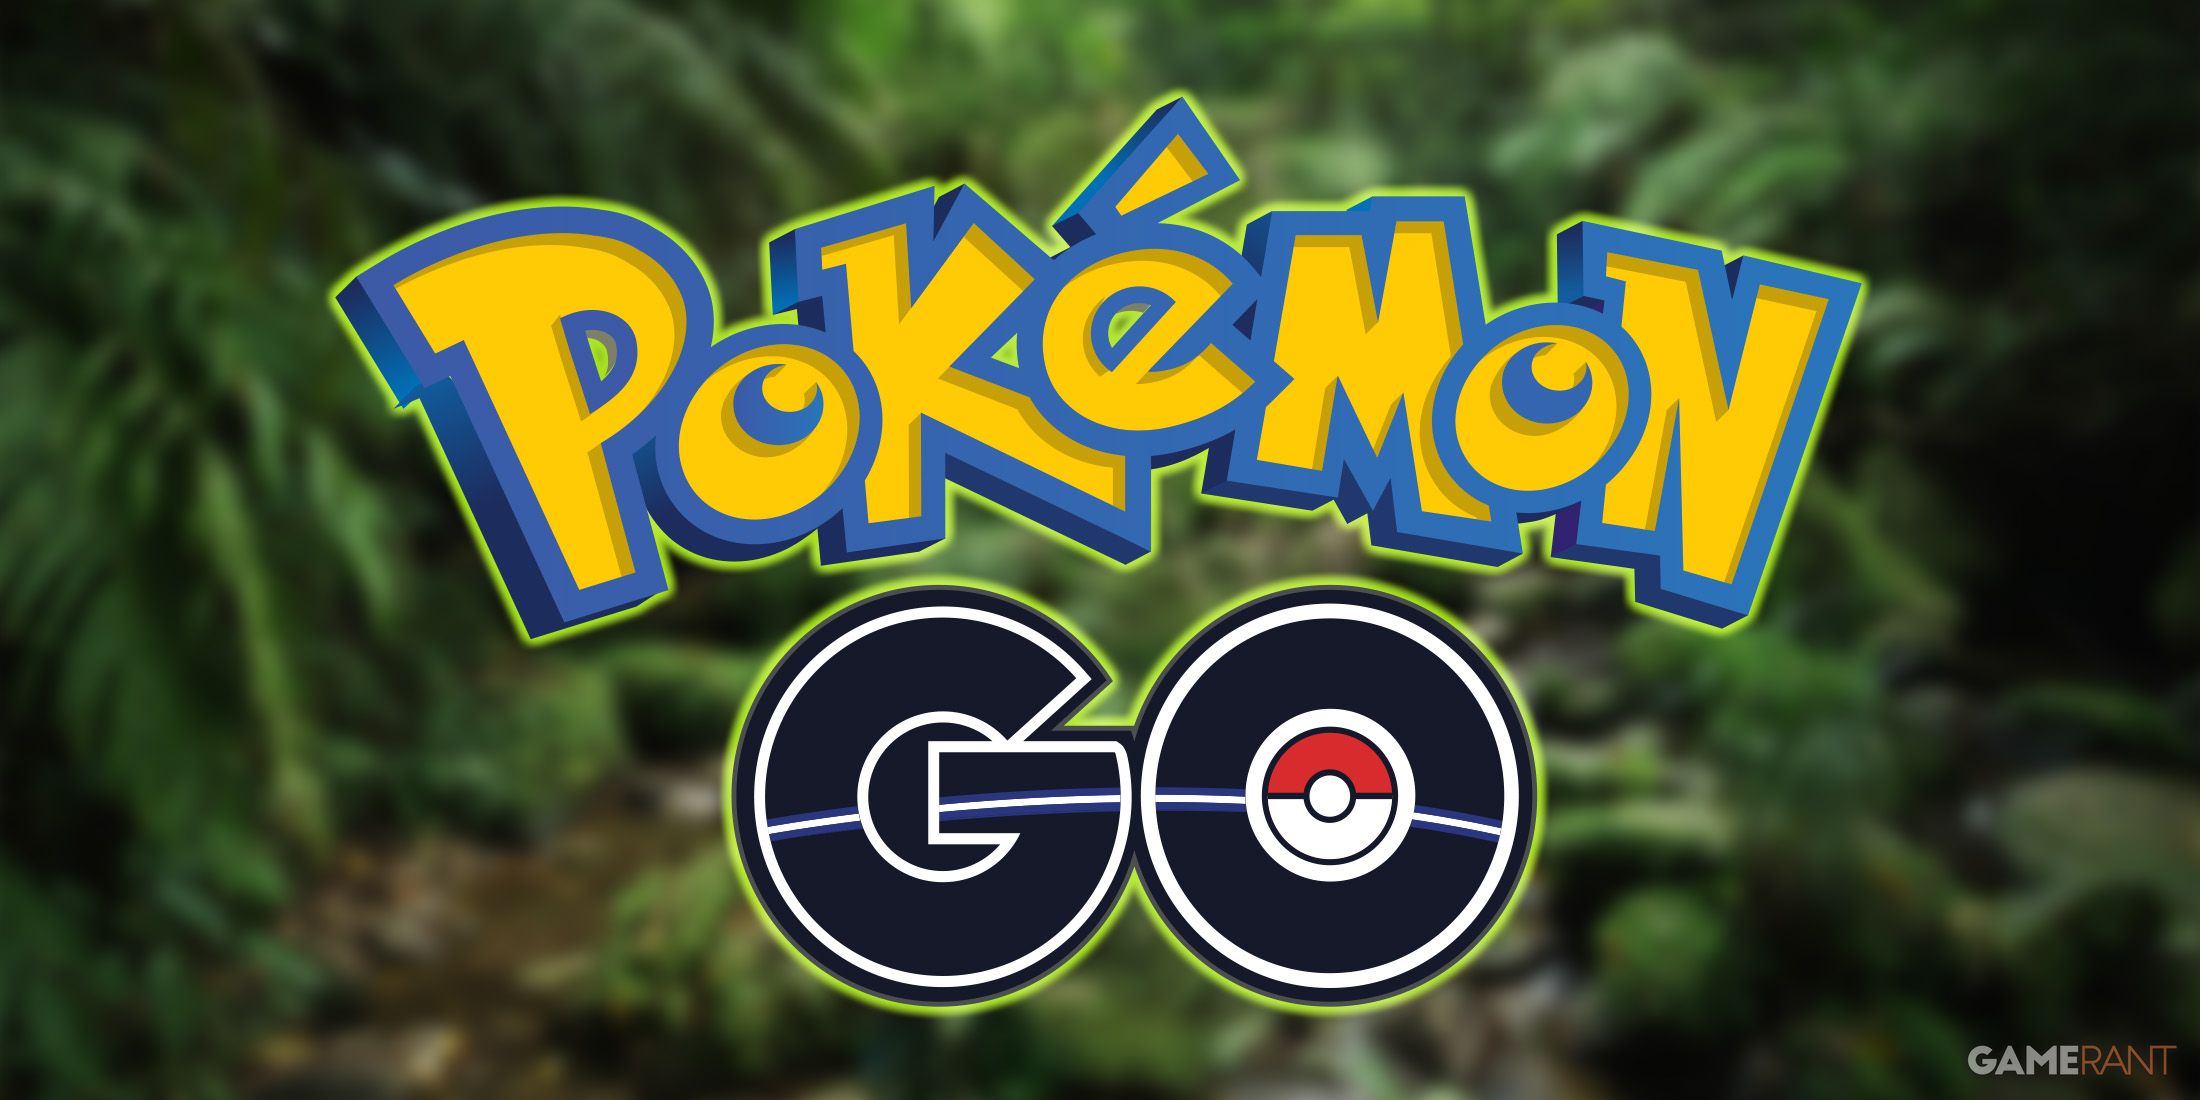 Pokemon GO logo with lime outer glow on blurred lush forest image